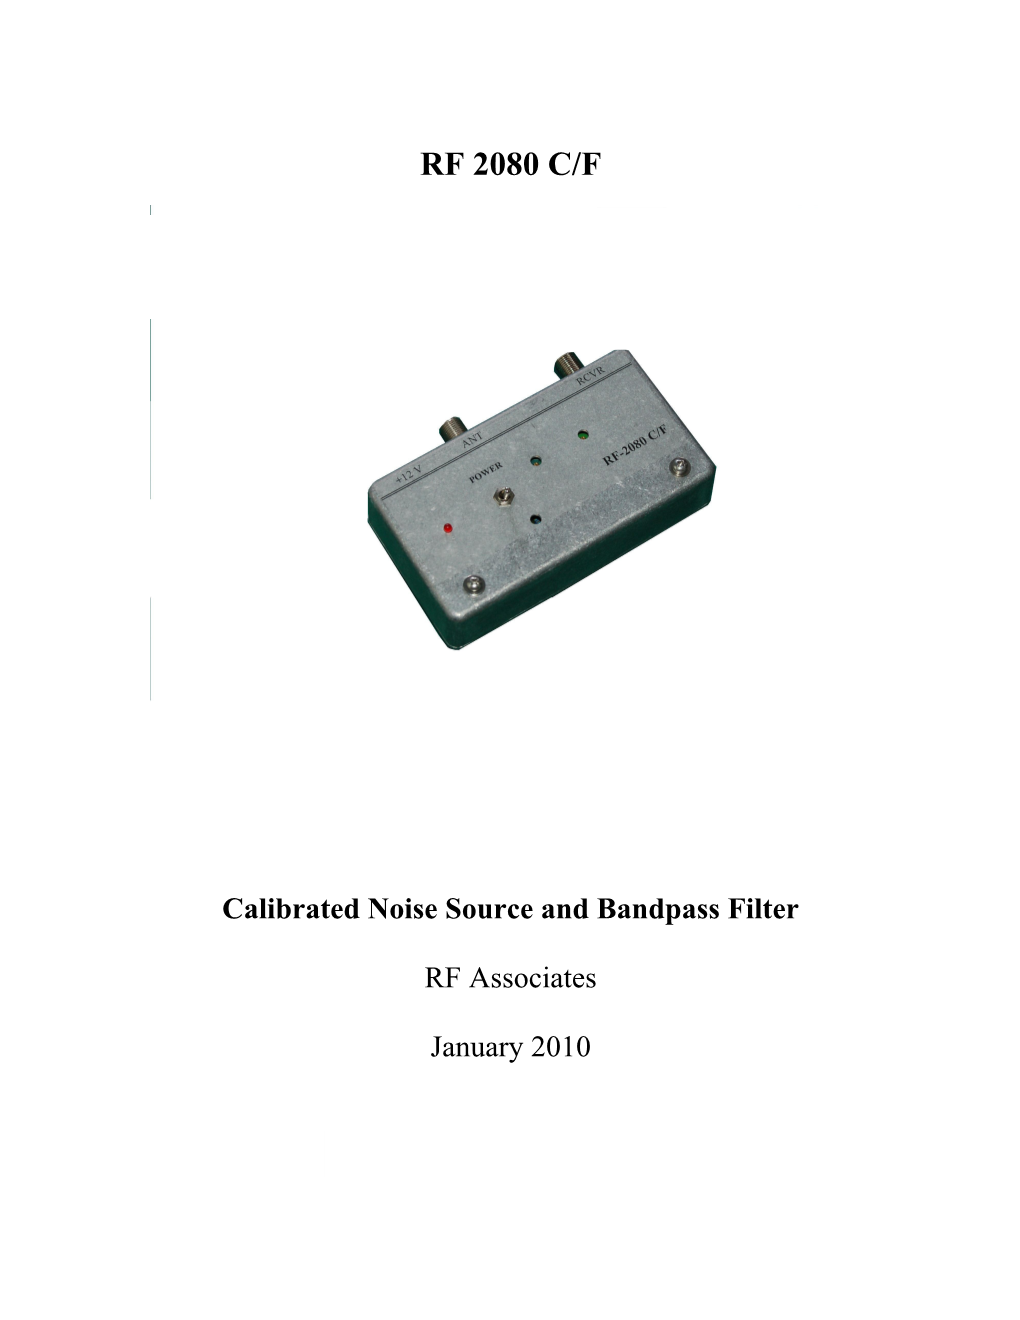 Calibrated Noise Source and Bandpass Filter